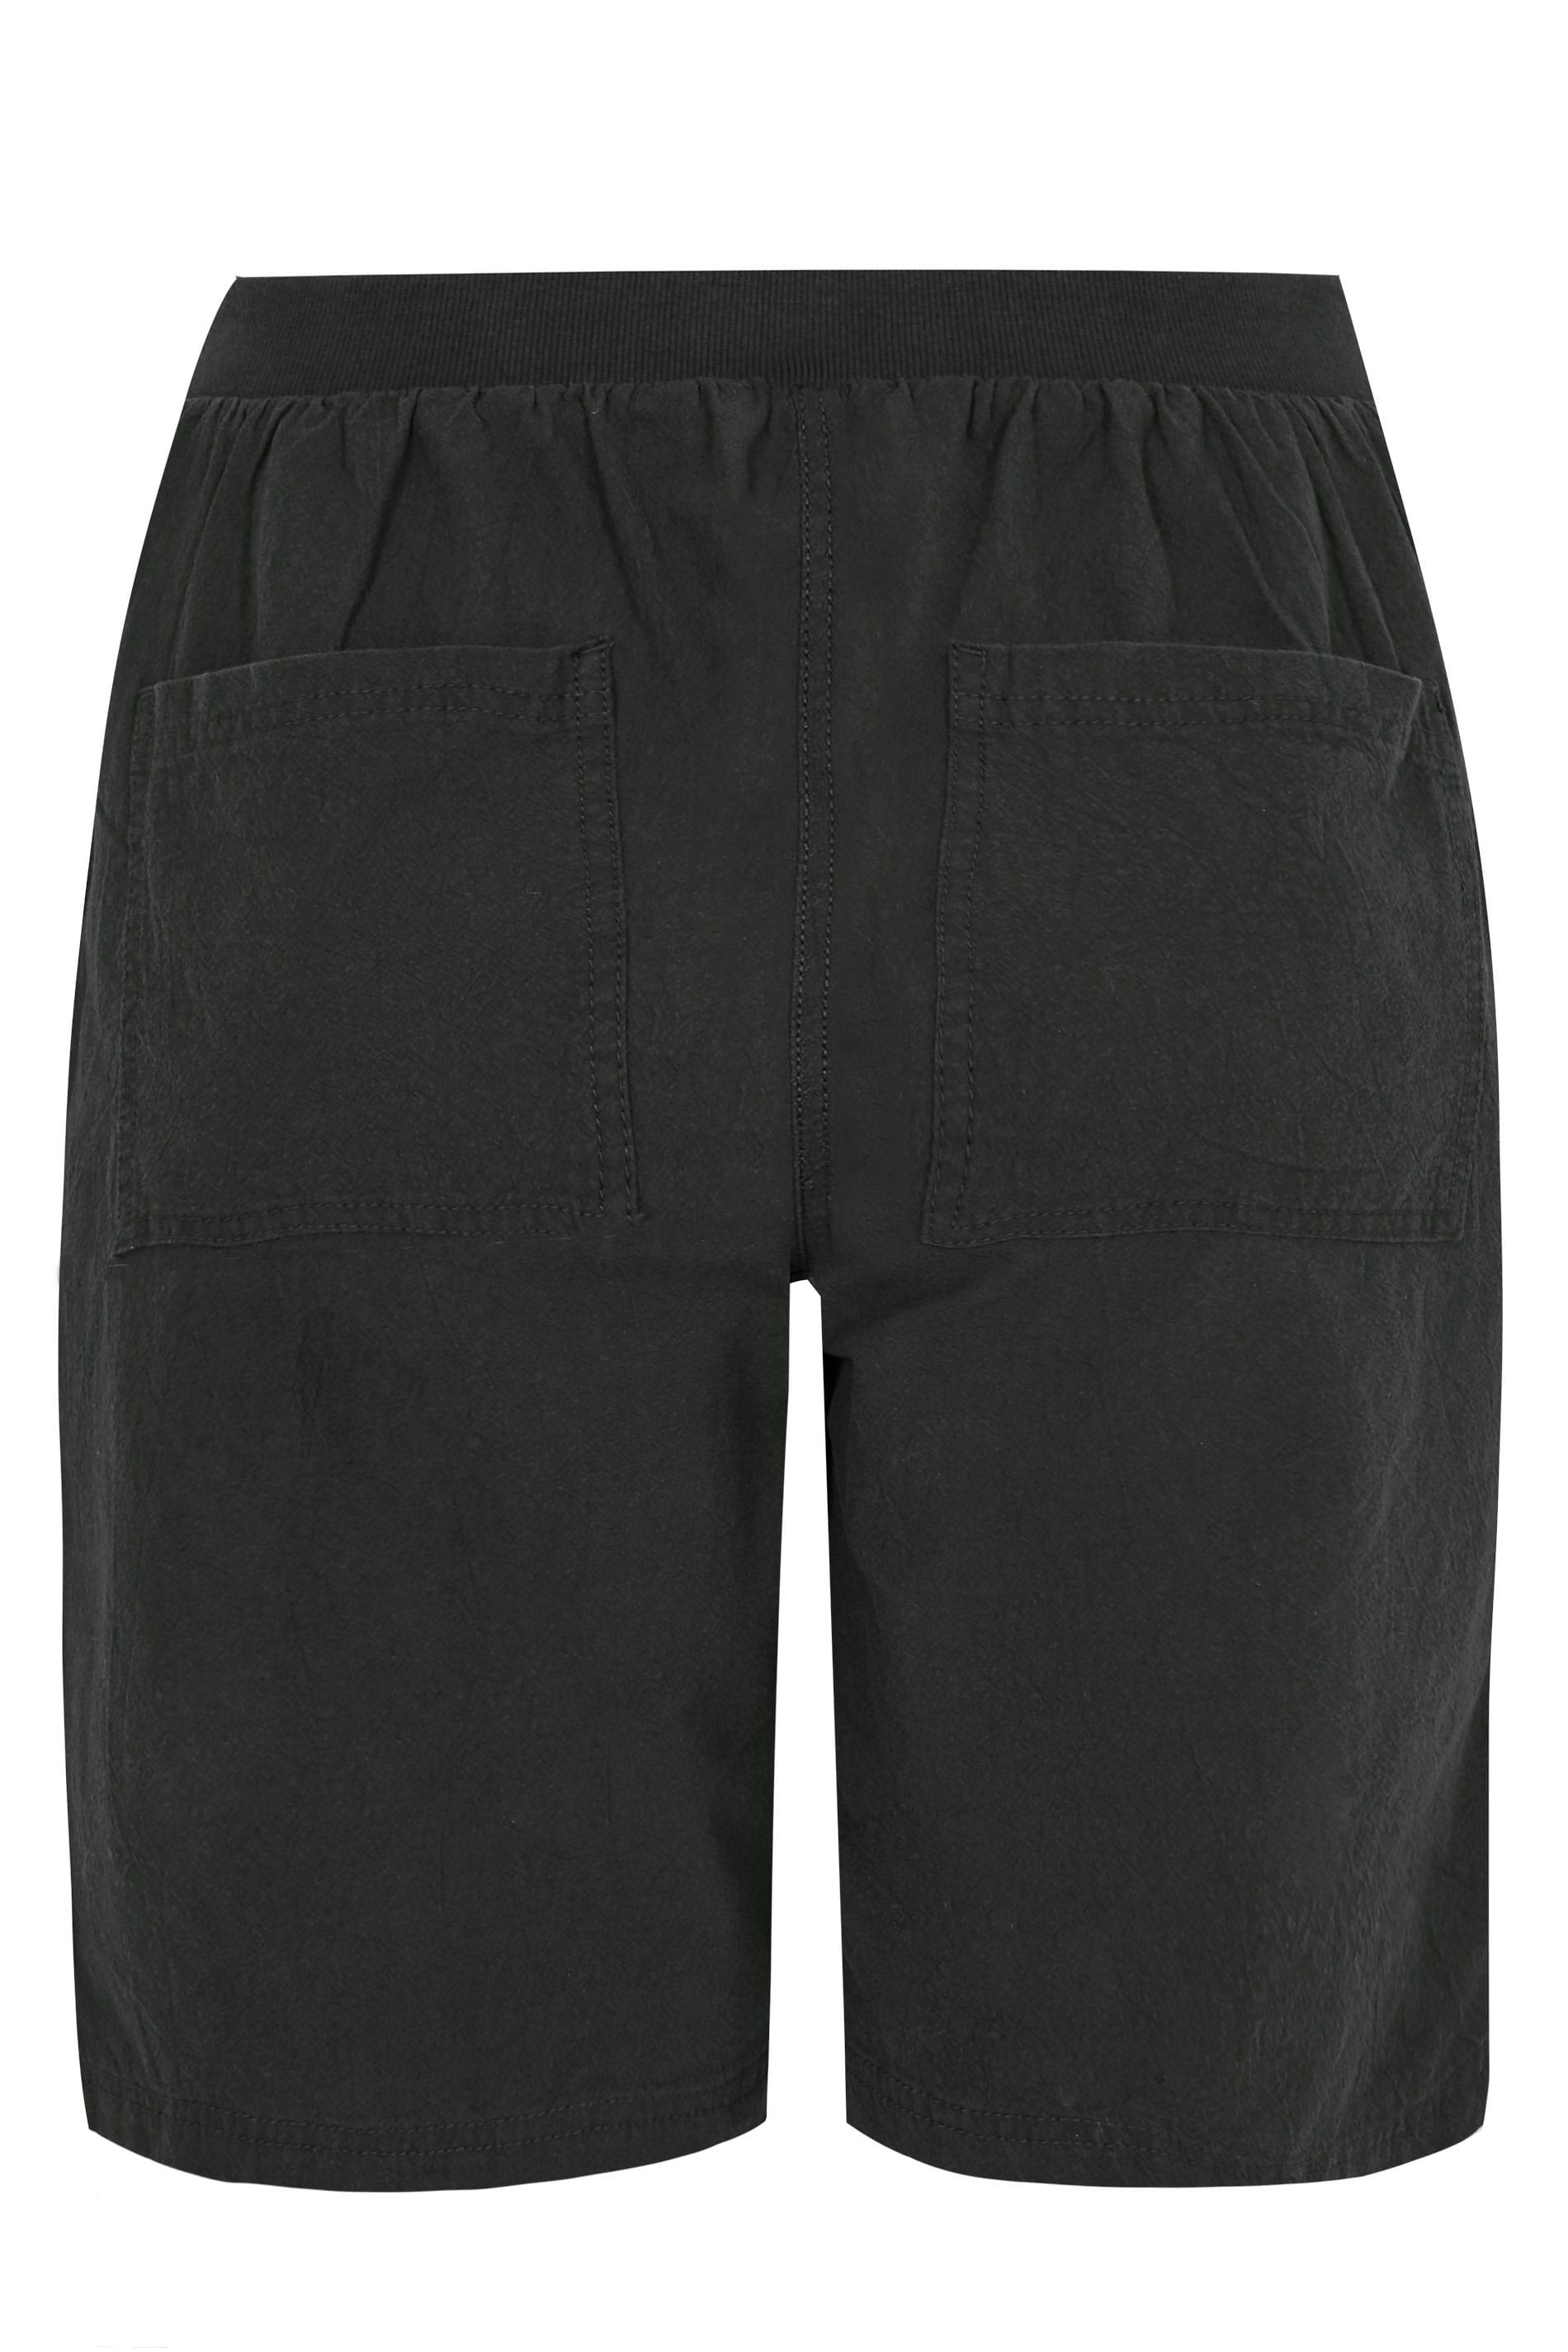 Black Cool Cotton Pull On Shorts | Sizes 16 to 36 | Yours Clothing